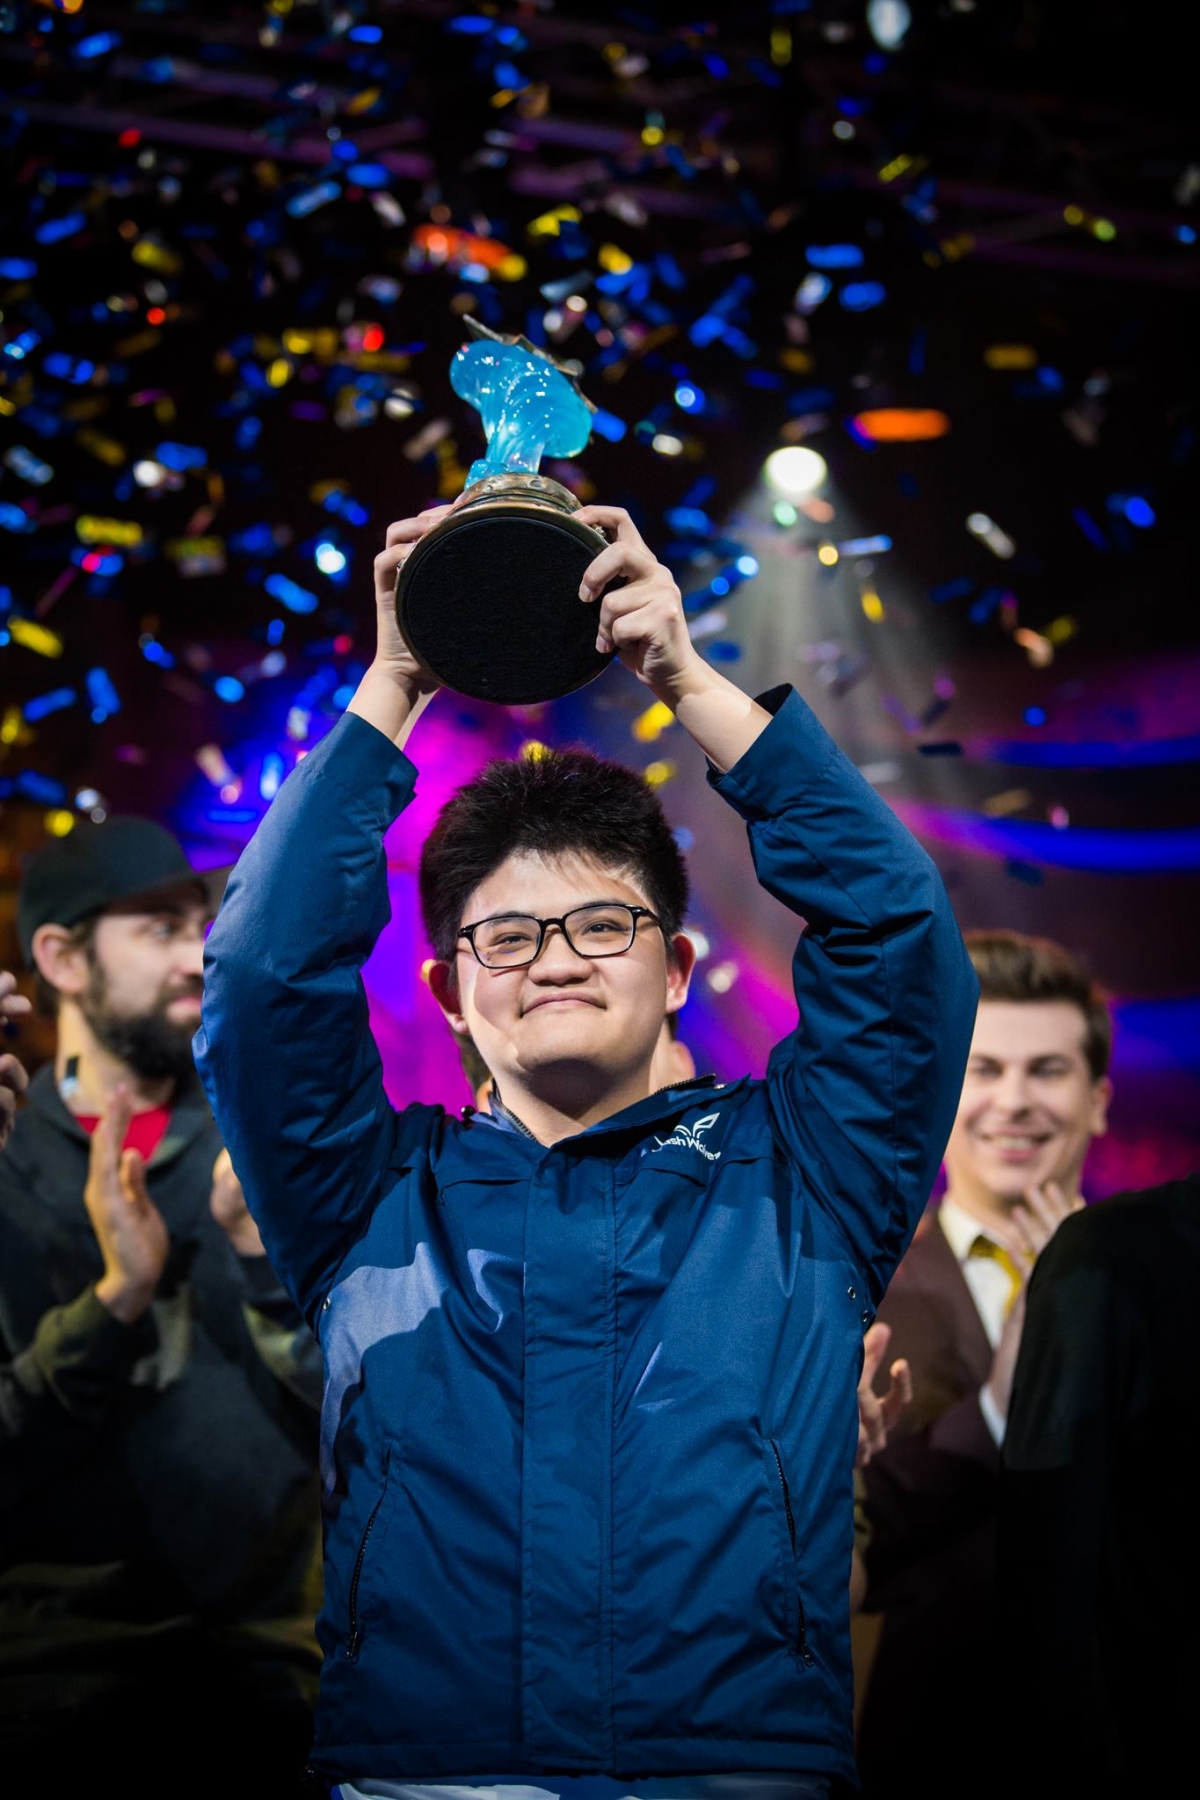 'Hearthstone' has crowned a new champion over crowd favorite